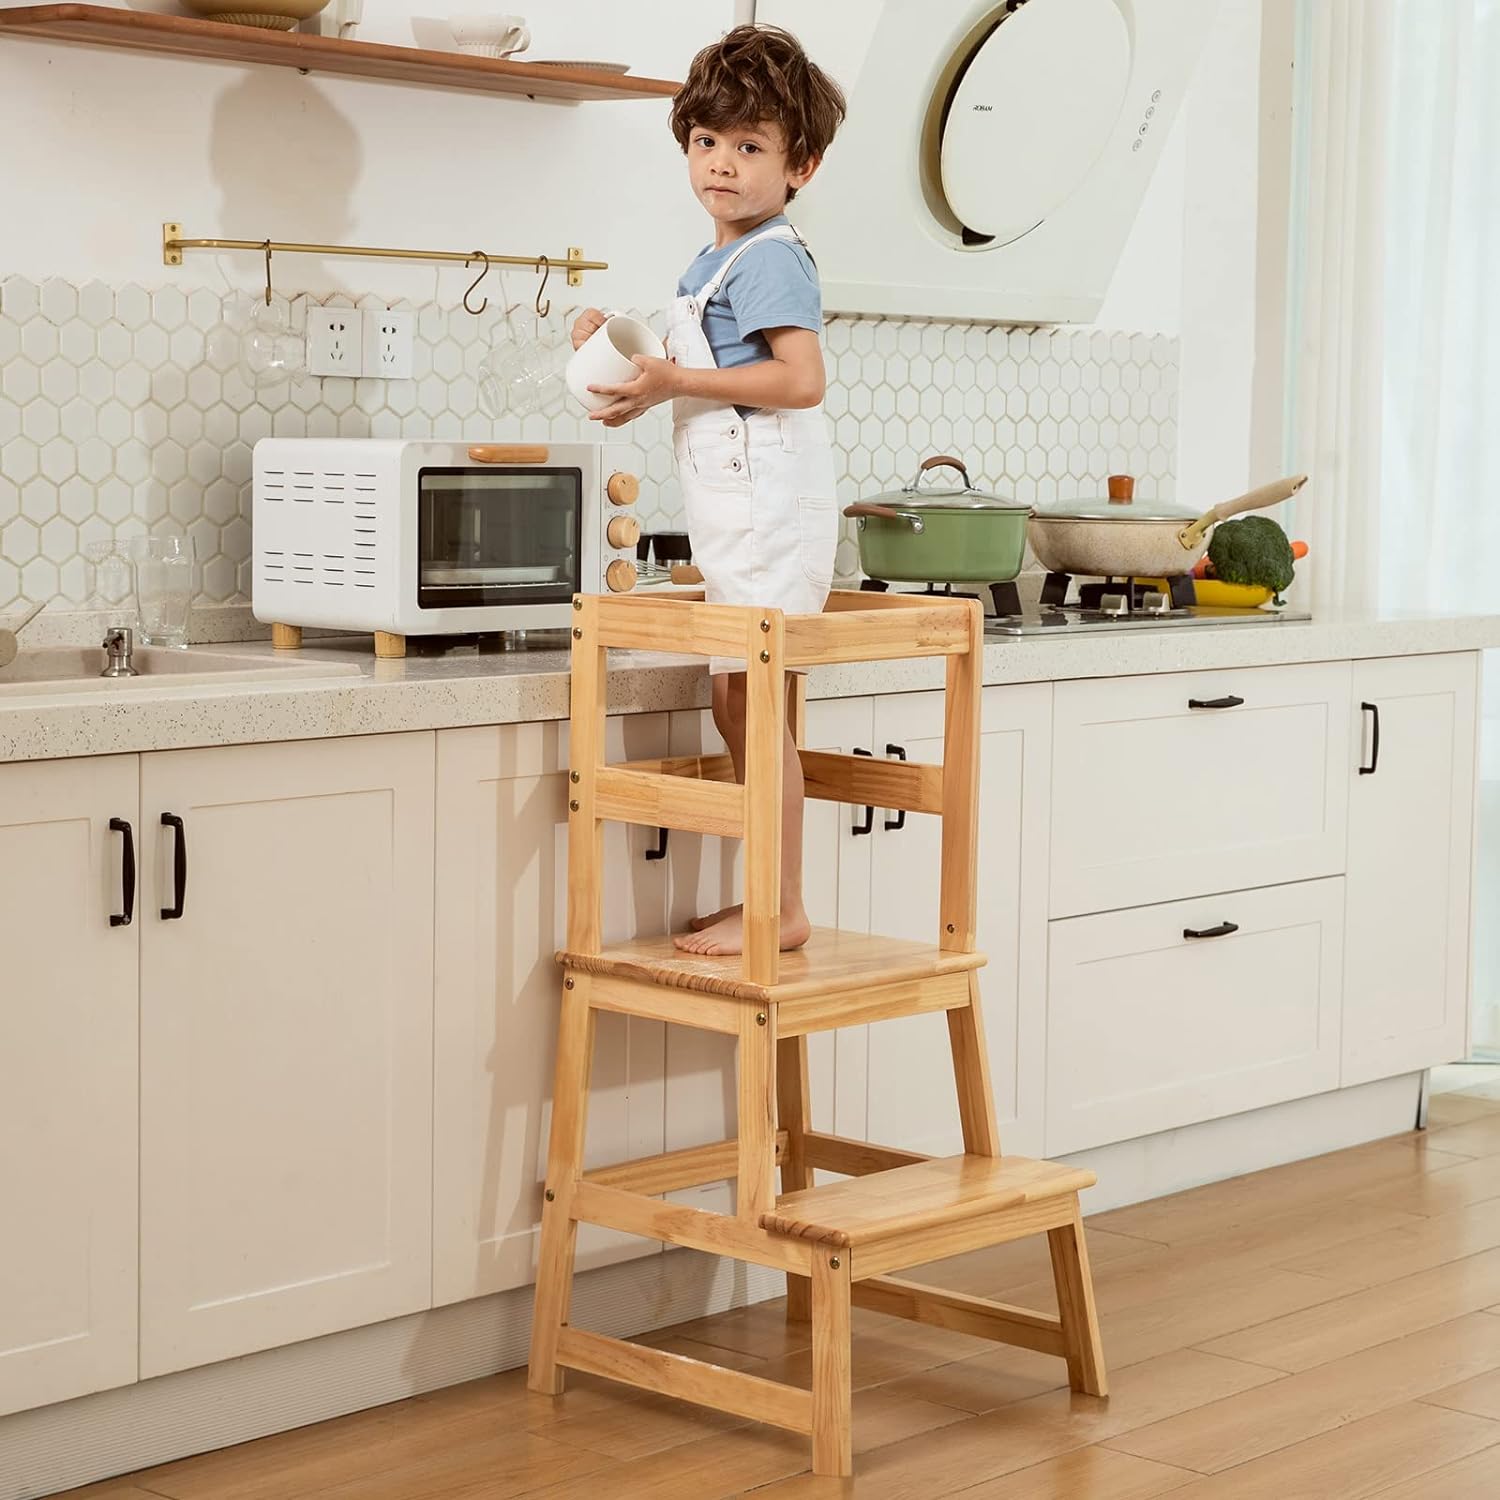 Kids Kitchen Step Stool with Safety Rail,Standing Learning Tower for Toddler